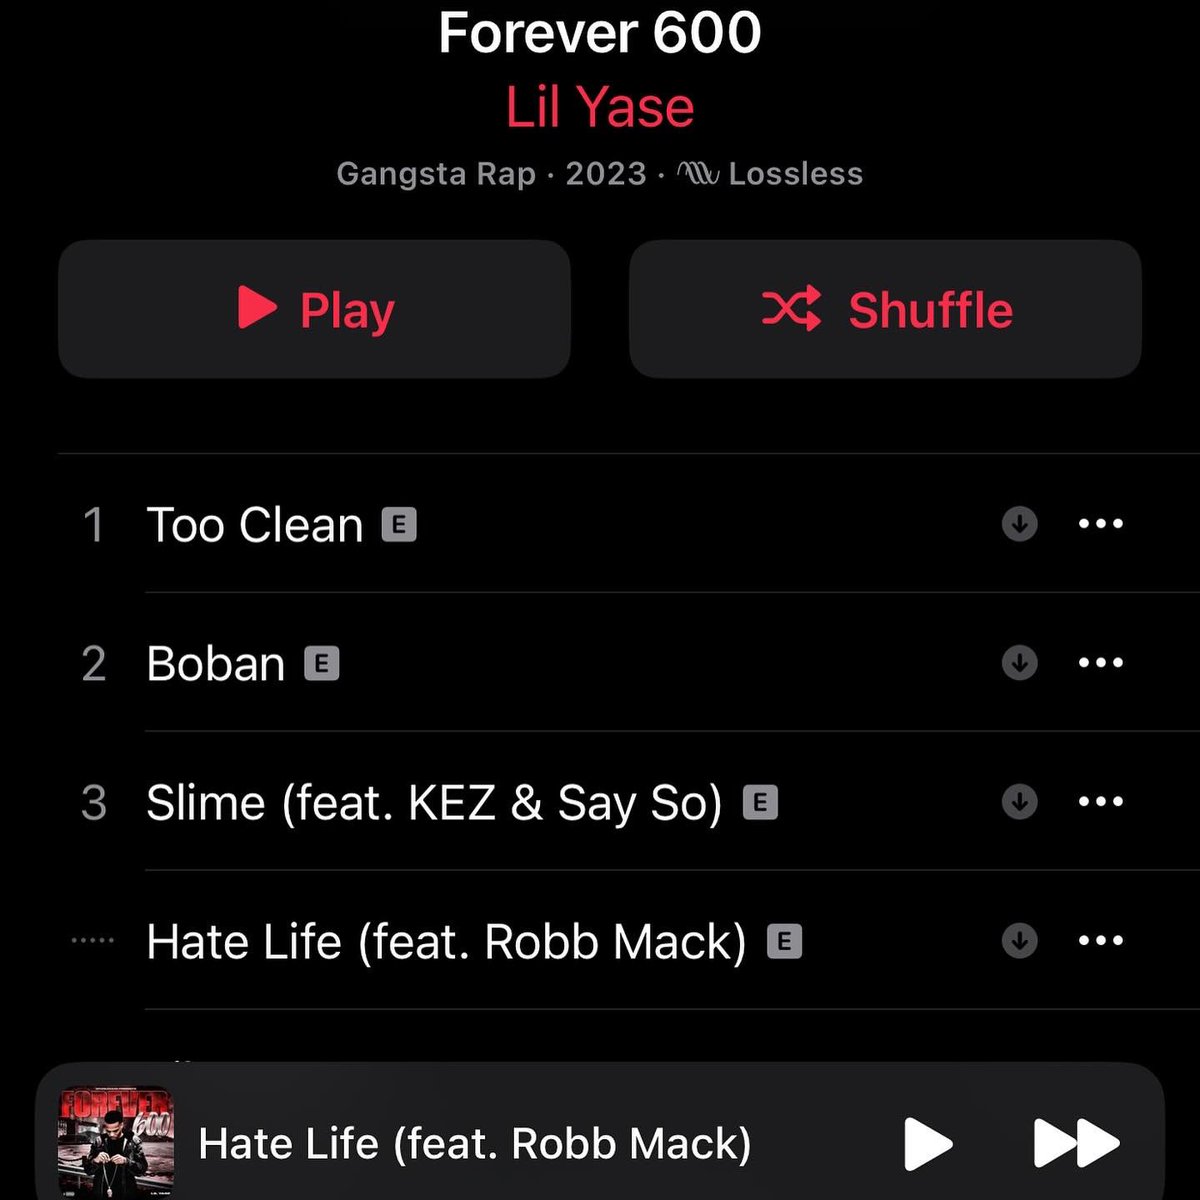 Go stream “Forever 600” By Lil Yase out now on all streaming platforms!  

Hate Life - Produced by Saul & @CioBeats 

#newmusic #lilyase #hatelife #thizzler #bayarea #bayslap #applemusic #empire #ciobeats